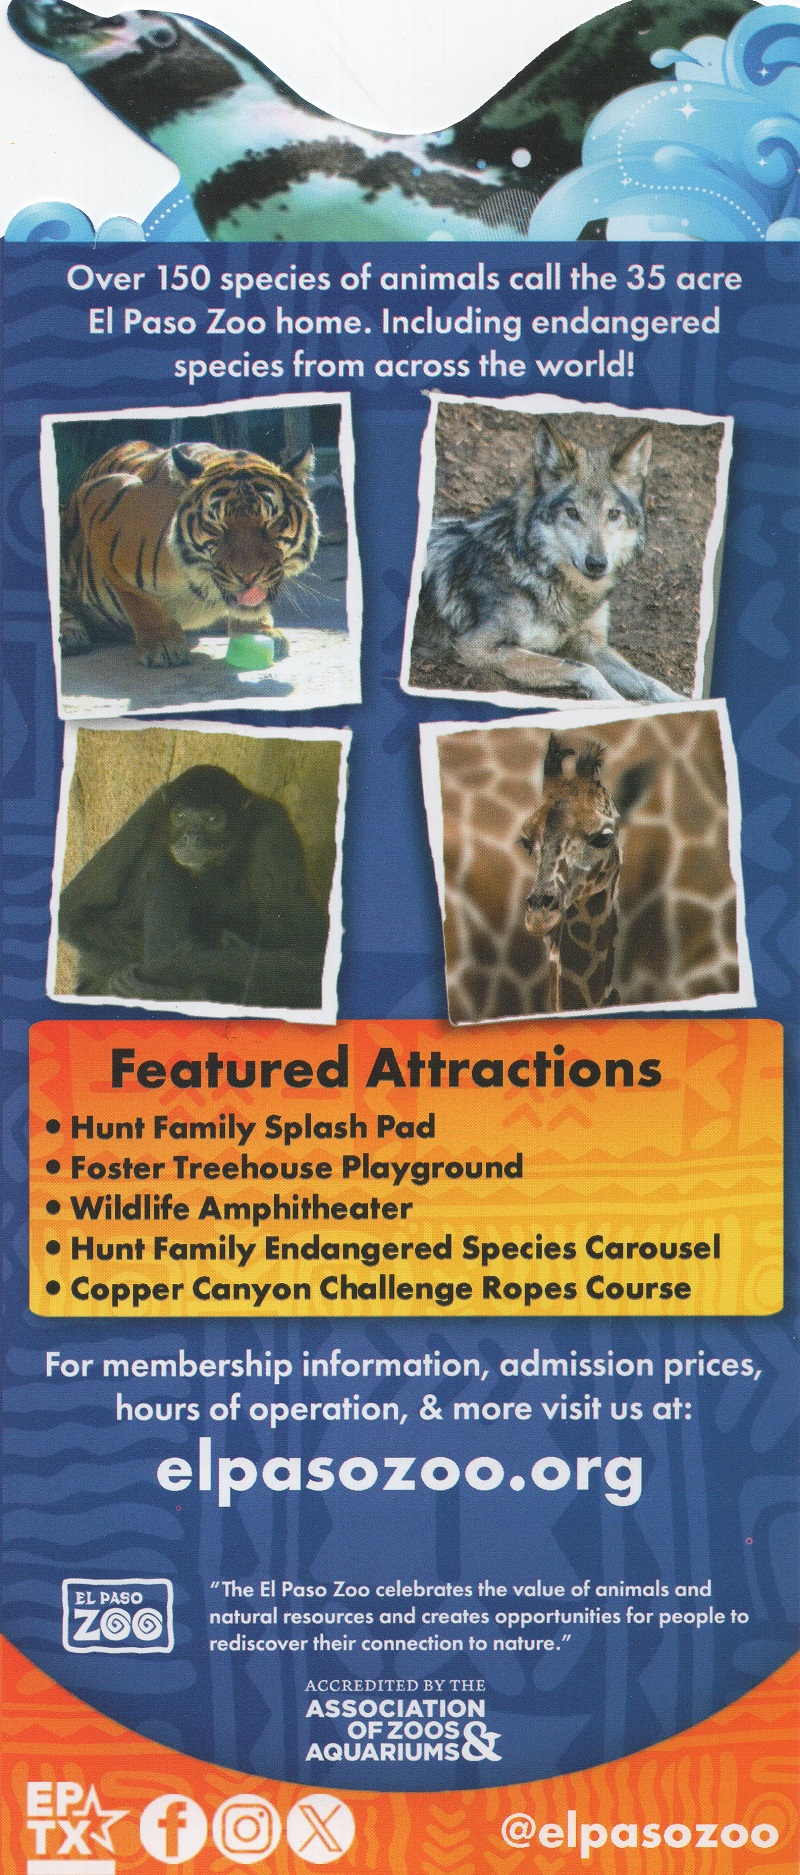 El Paso Zoo Things to do on VisitorTips